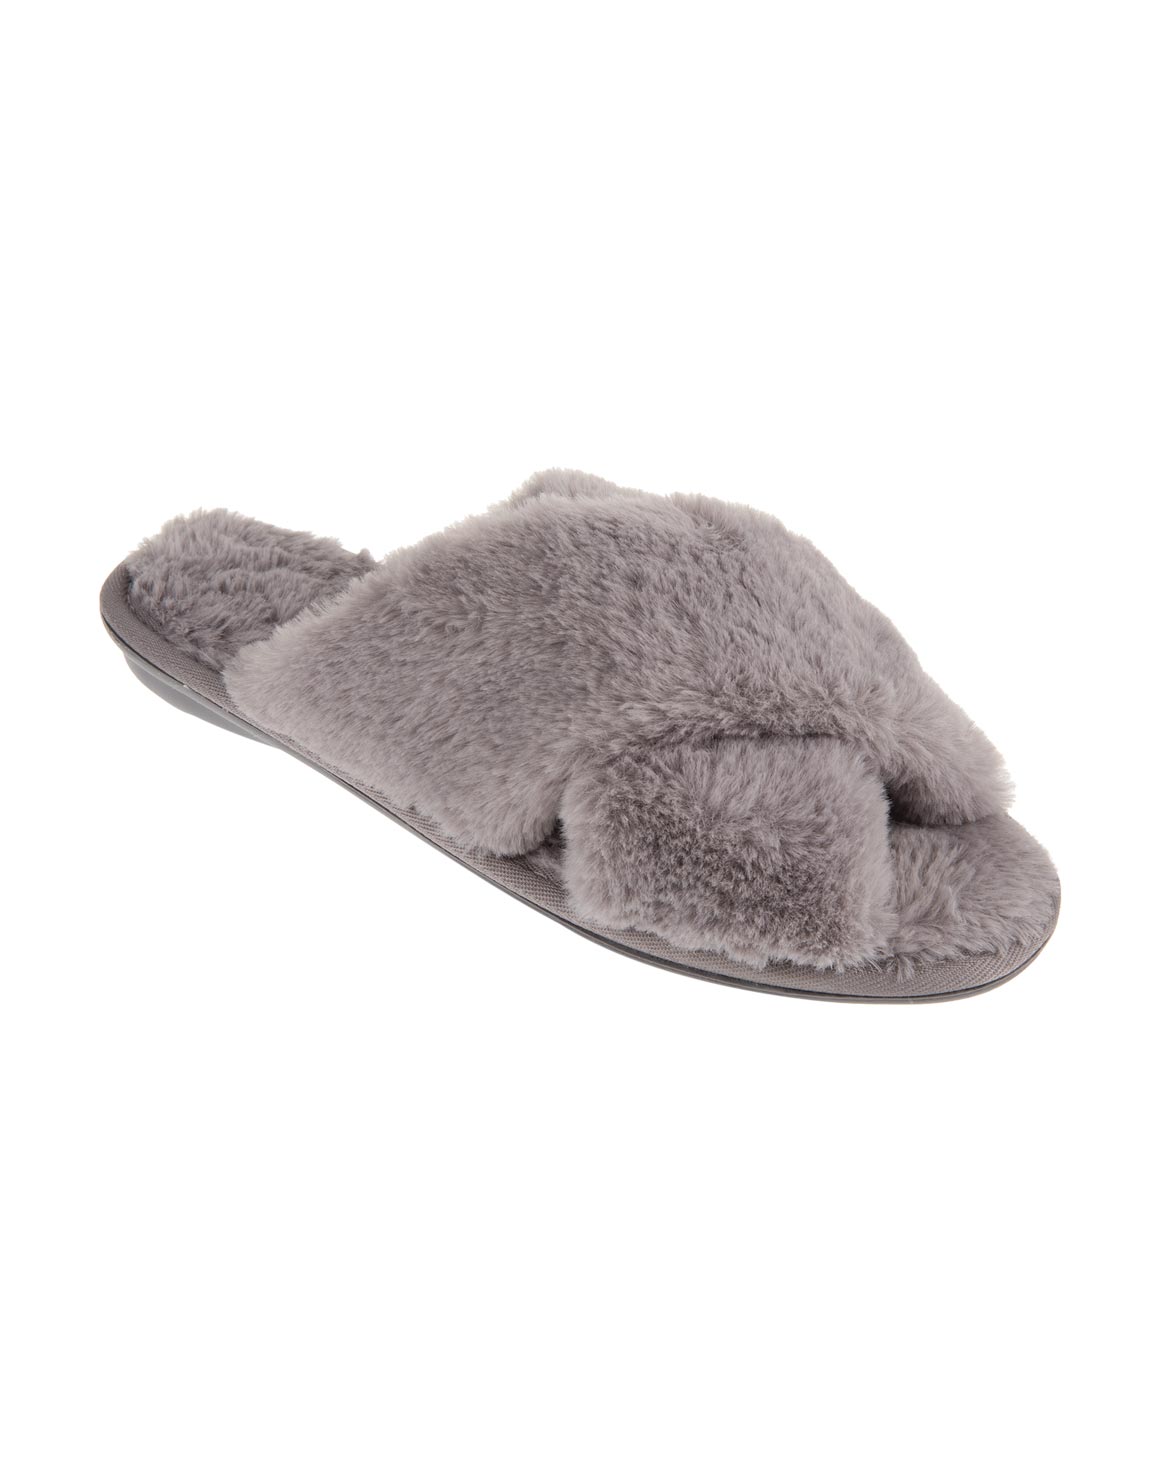 woolworths slippers for ladies